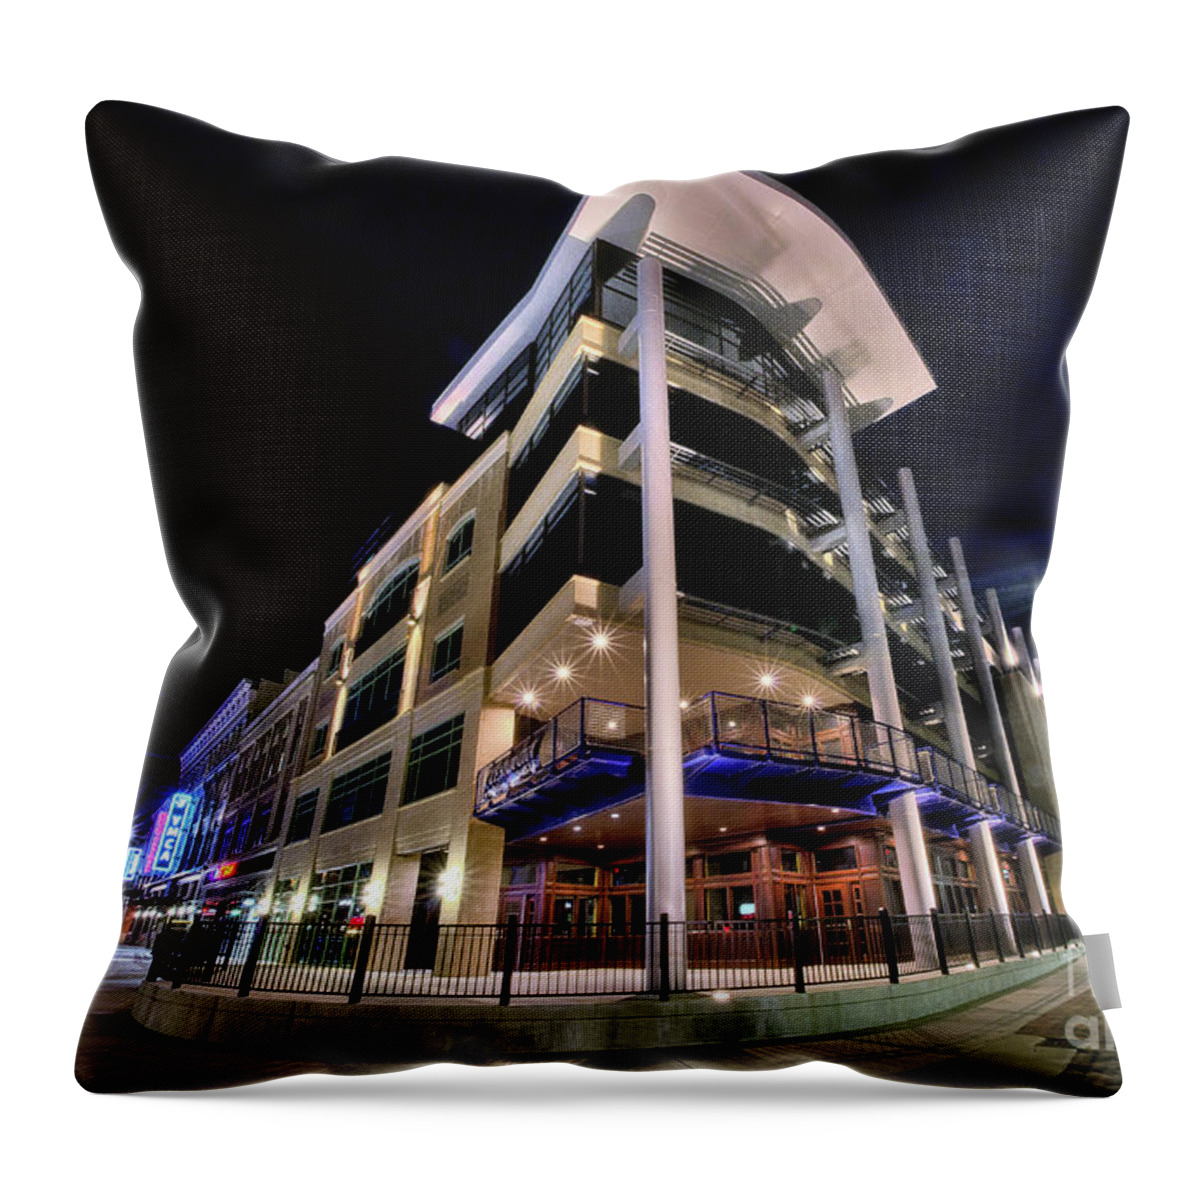 Cities Throw Pillow featuring the photograph City Center by Neil Shapiro